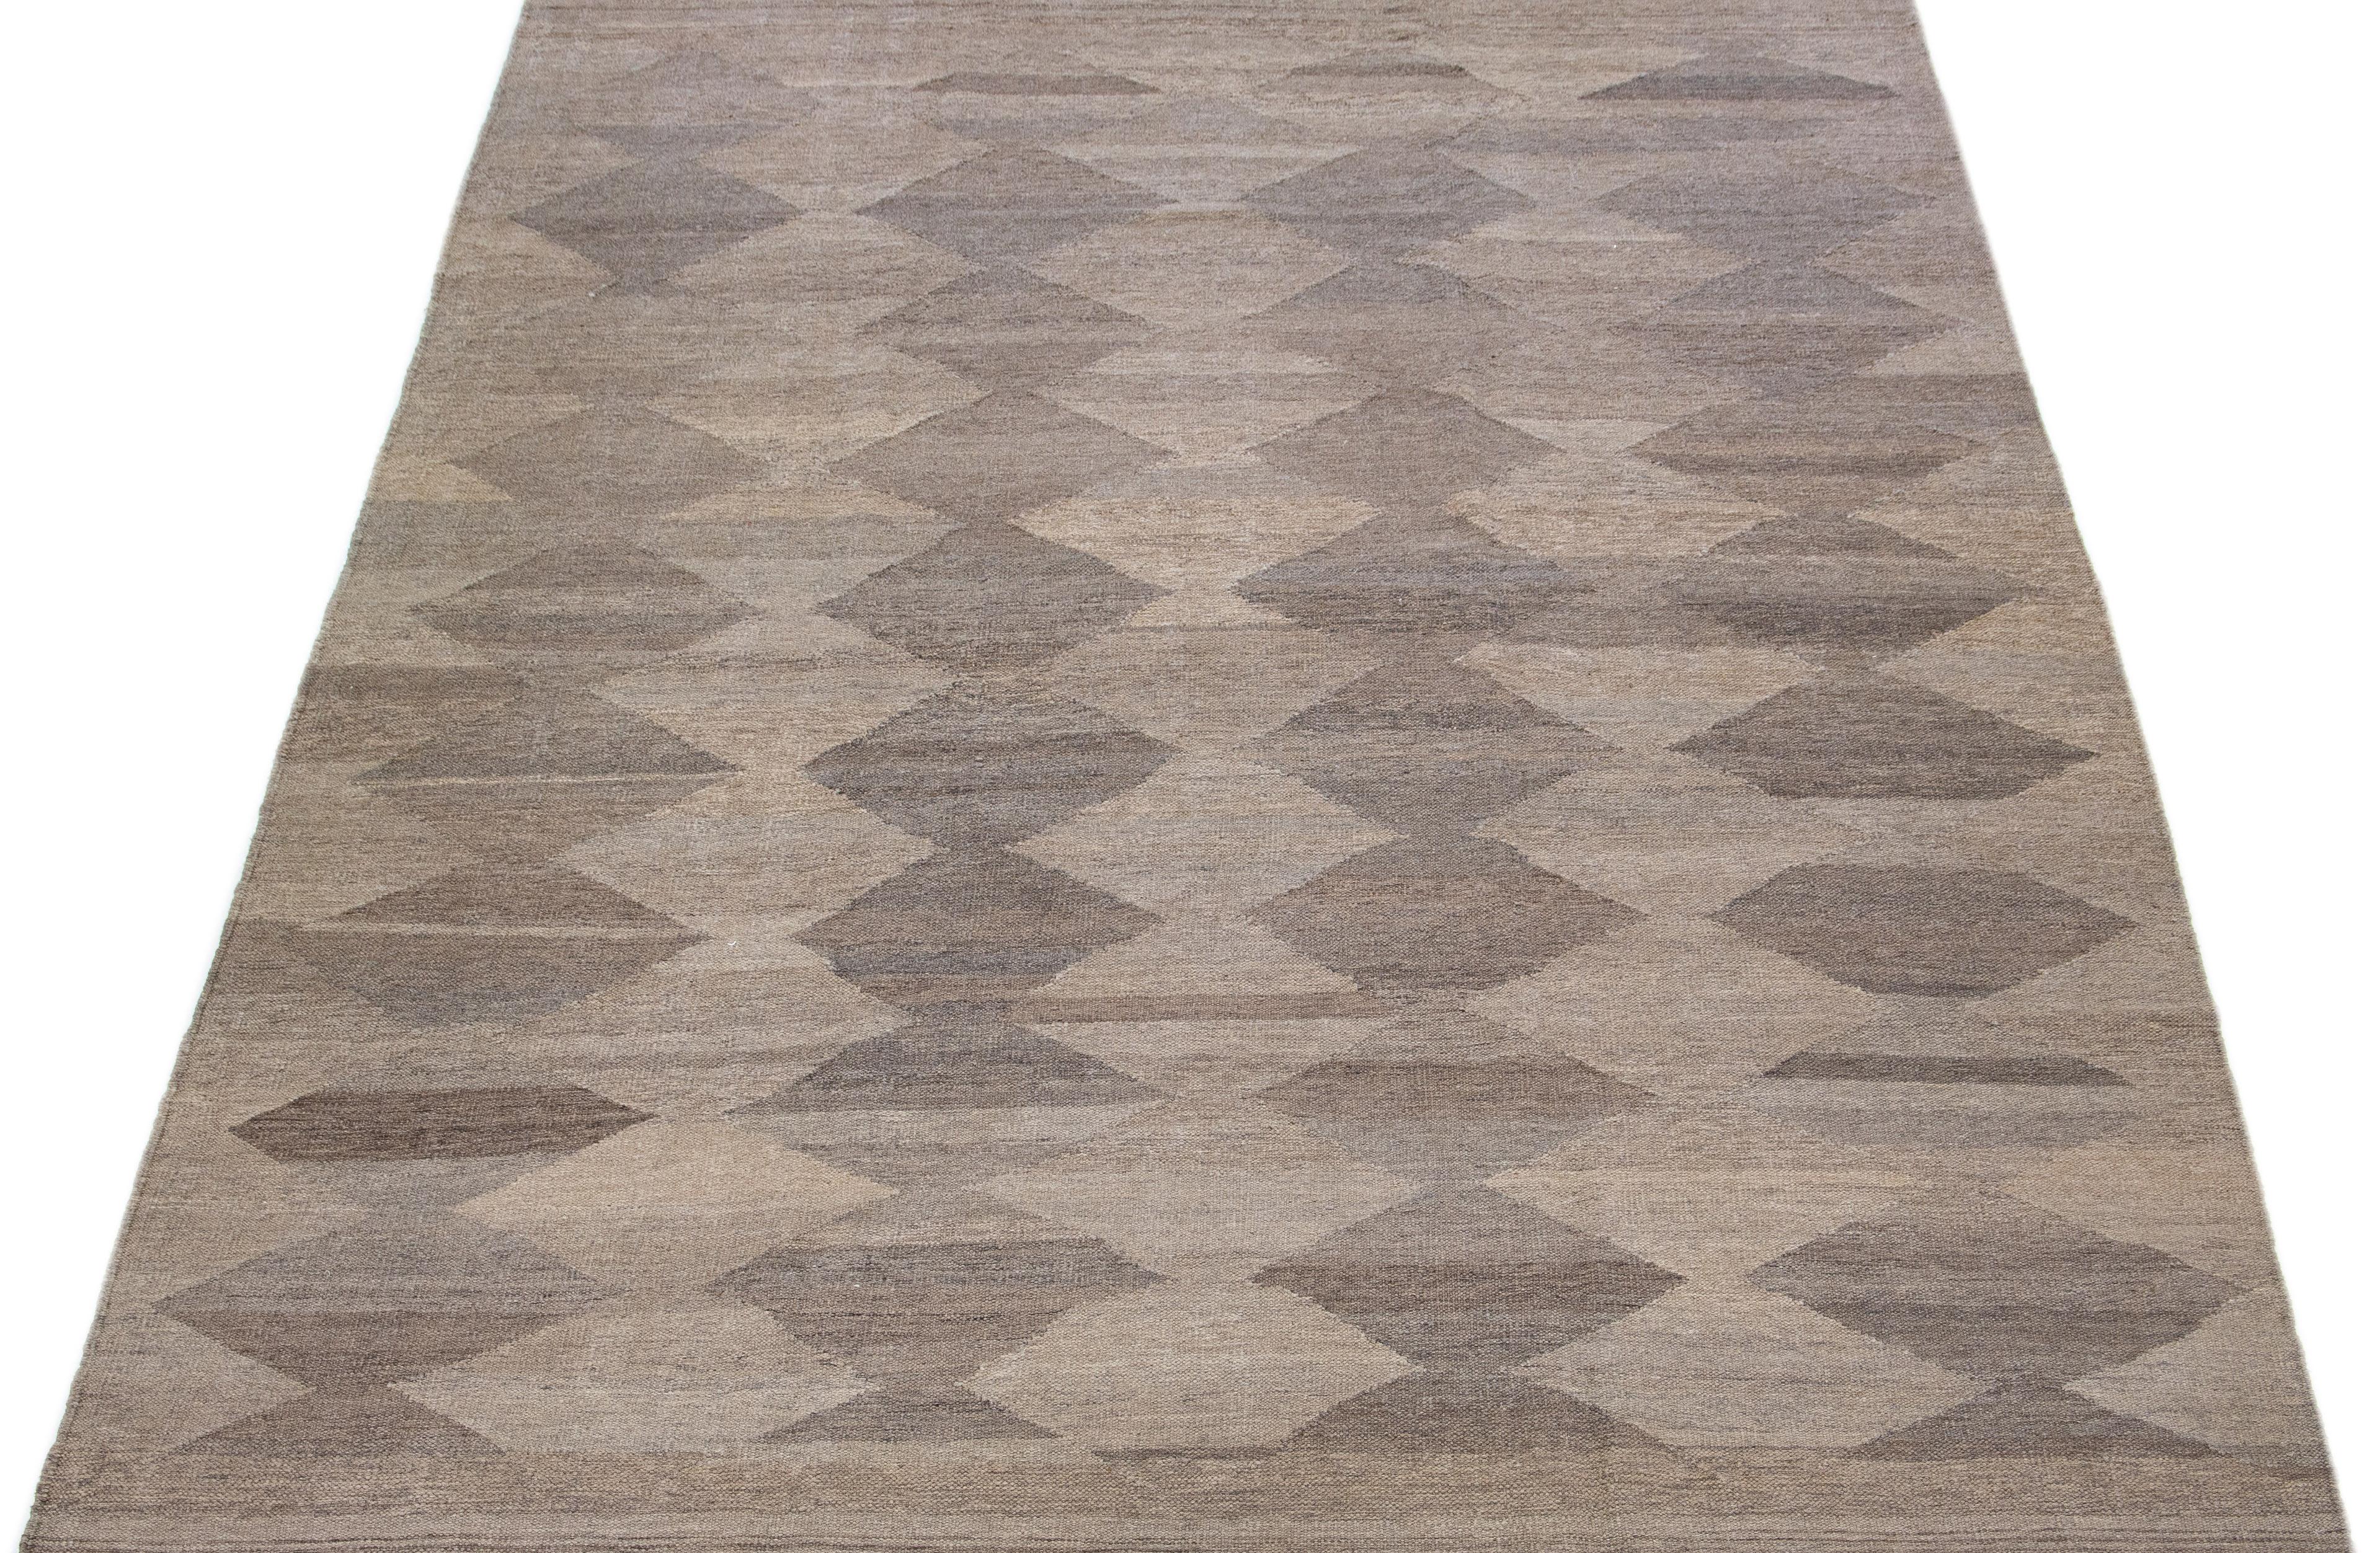 This wool flatweave Kilim rug is enhanced with a captivating brown color field and grey highlights throughout. Its geometric design gives it a modern, aesthetically-appealing allure.

This rug measures 8'8